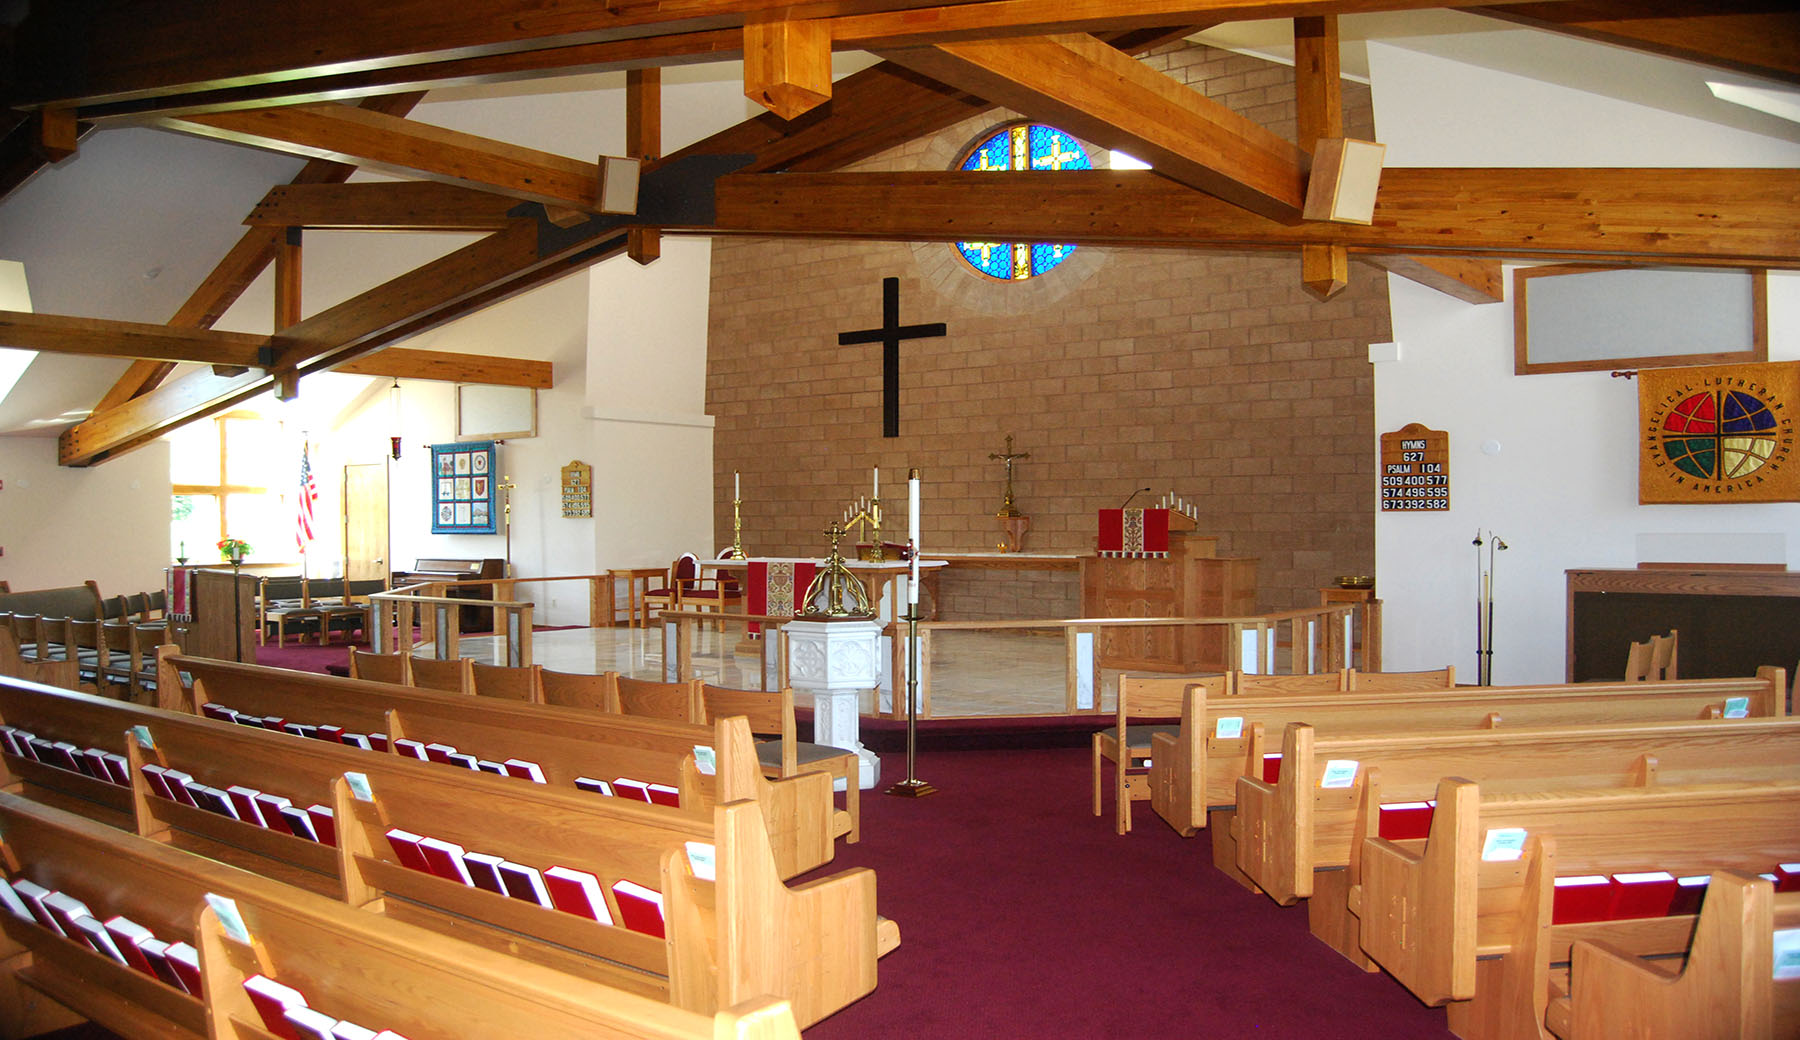 Lothrop Associates designed a 9,500 square foot addition with other interior alterations for Saint John’s Church. The addition provided a new sanctuary, chapel, sacristy, choir/storage, narthex, administrative offices, and support spaces. Interior alterations created a multi-purpose room and other support spaces.  